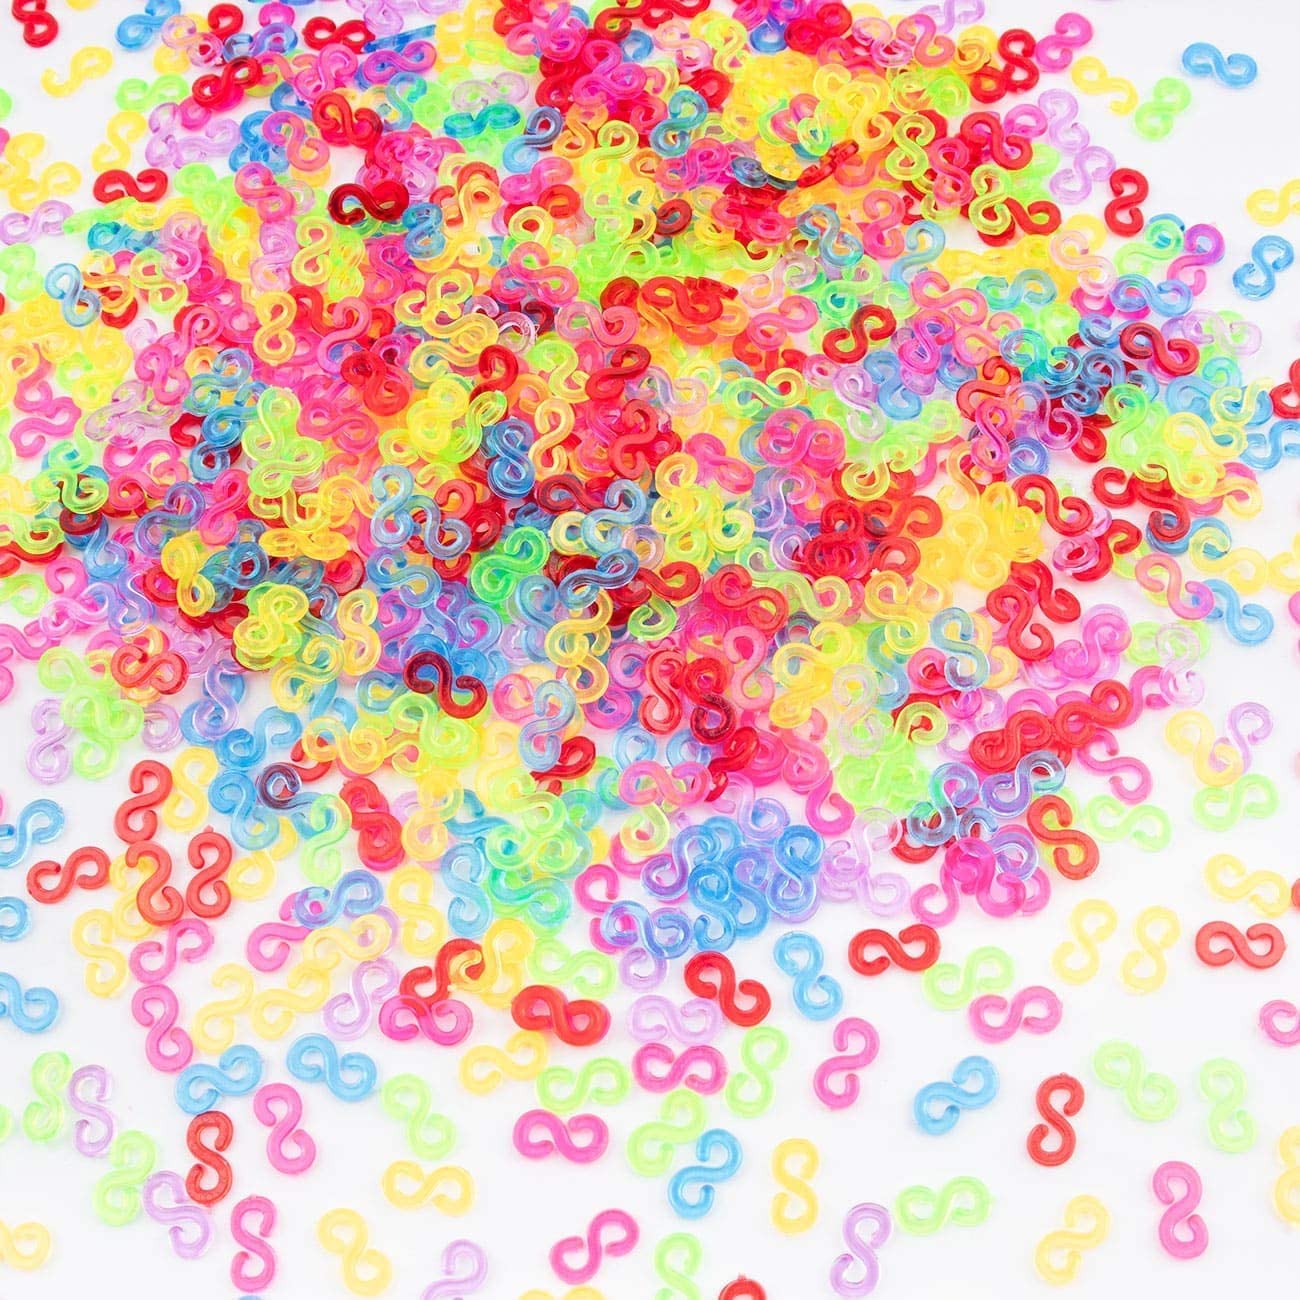 Rolybag 400Pieces Colorful S Clips Rubber Band Loom Band S Clips